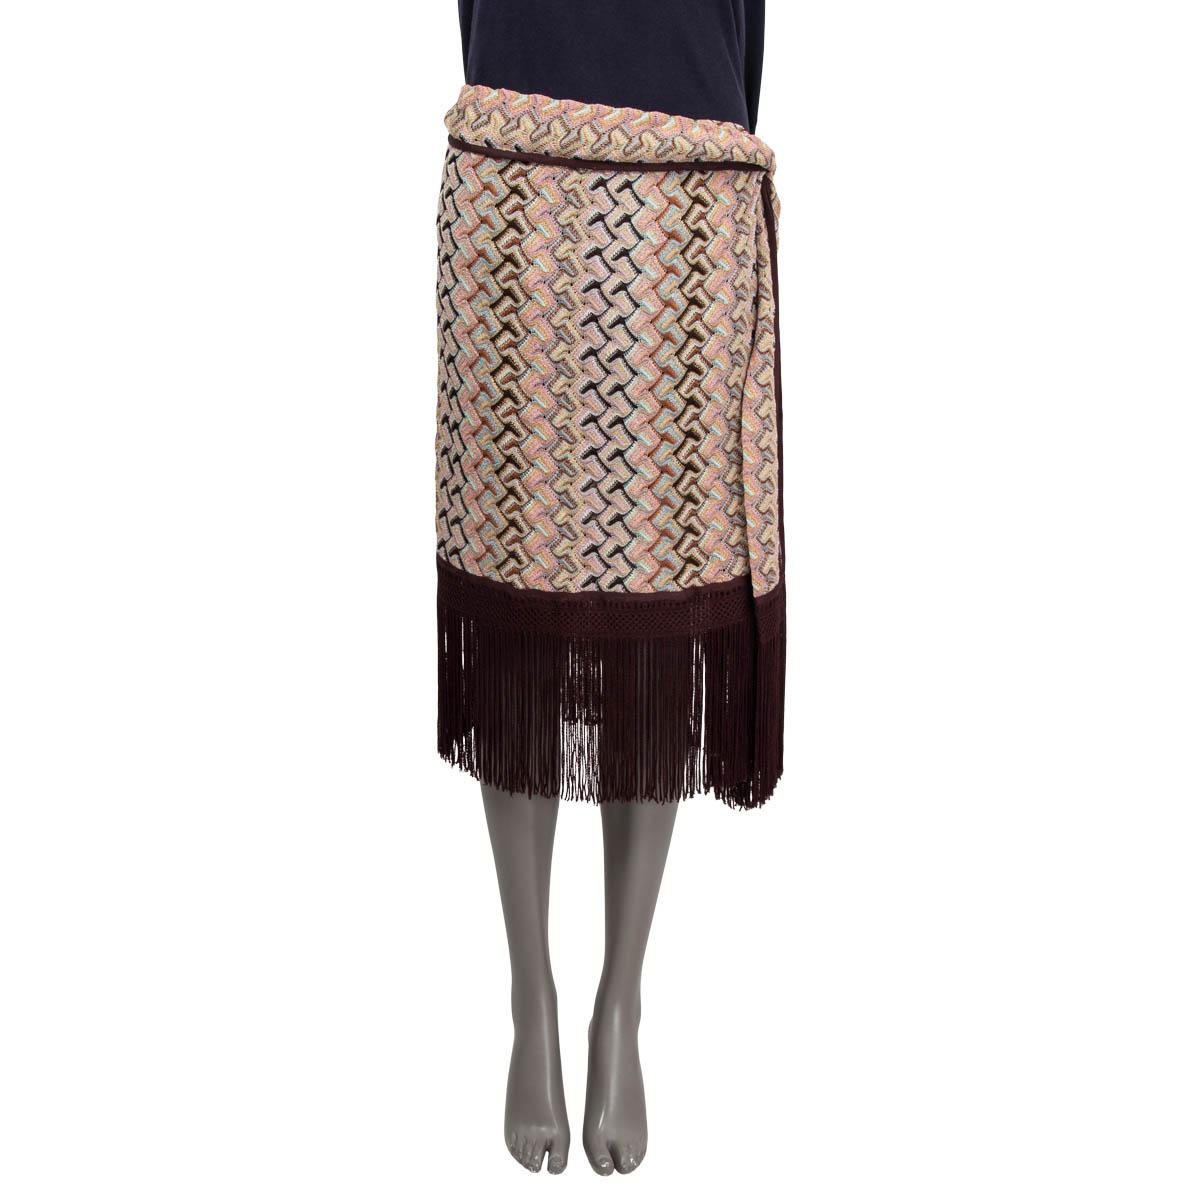 100% authentic Missoni side-tie knit skirt in chocolate brown and multicolor viscose (64%) and cupro ( 23%) and polyester. Features long fringes along the hems. Closes with a zipper on the side and is lined in polyester (100%) Has been worn and in